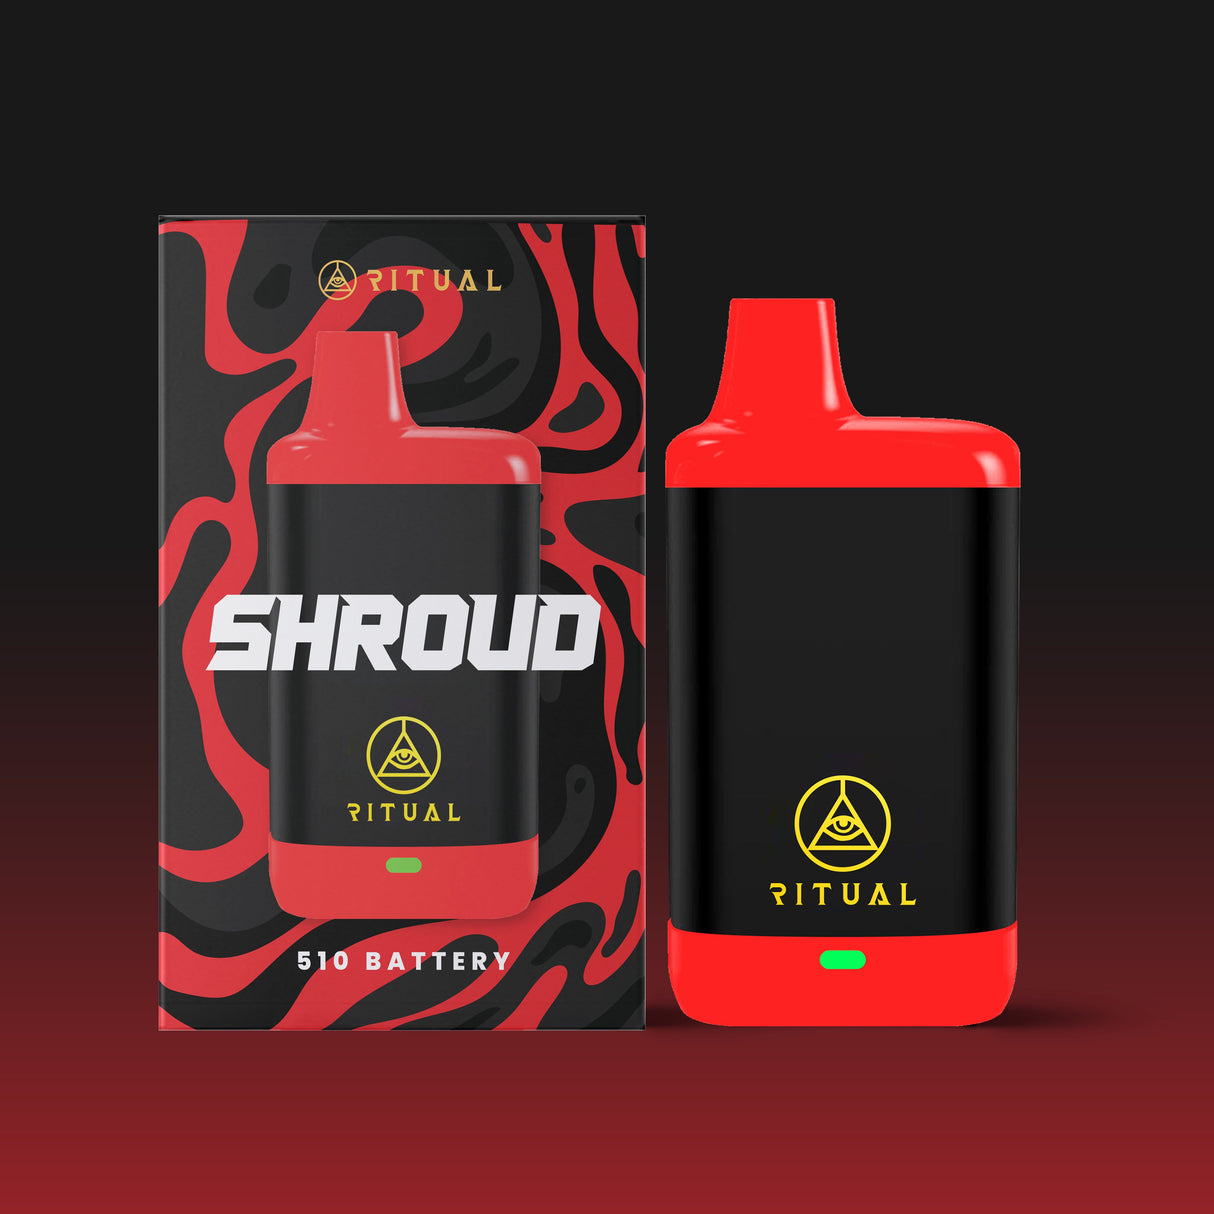 Ritual Shroud 510 Variable Voltage Battery in Red & Black with Packaging